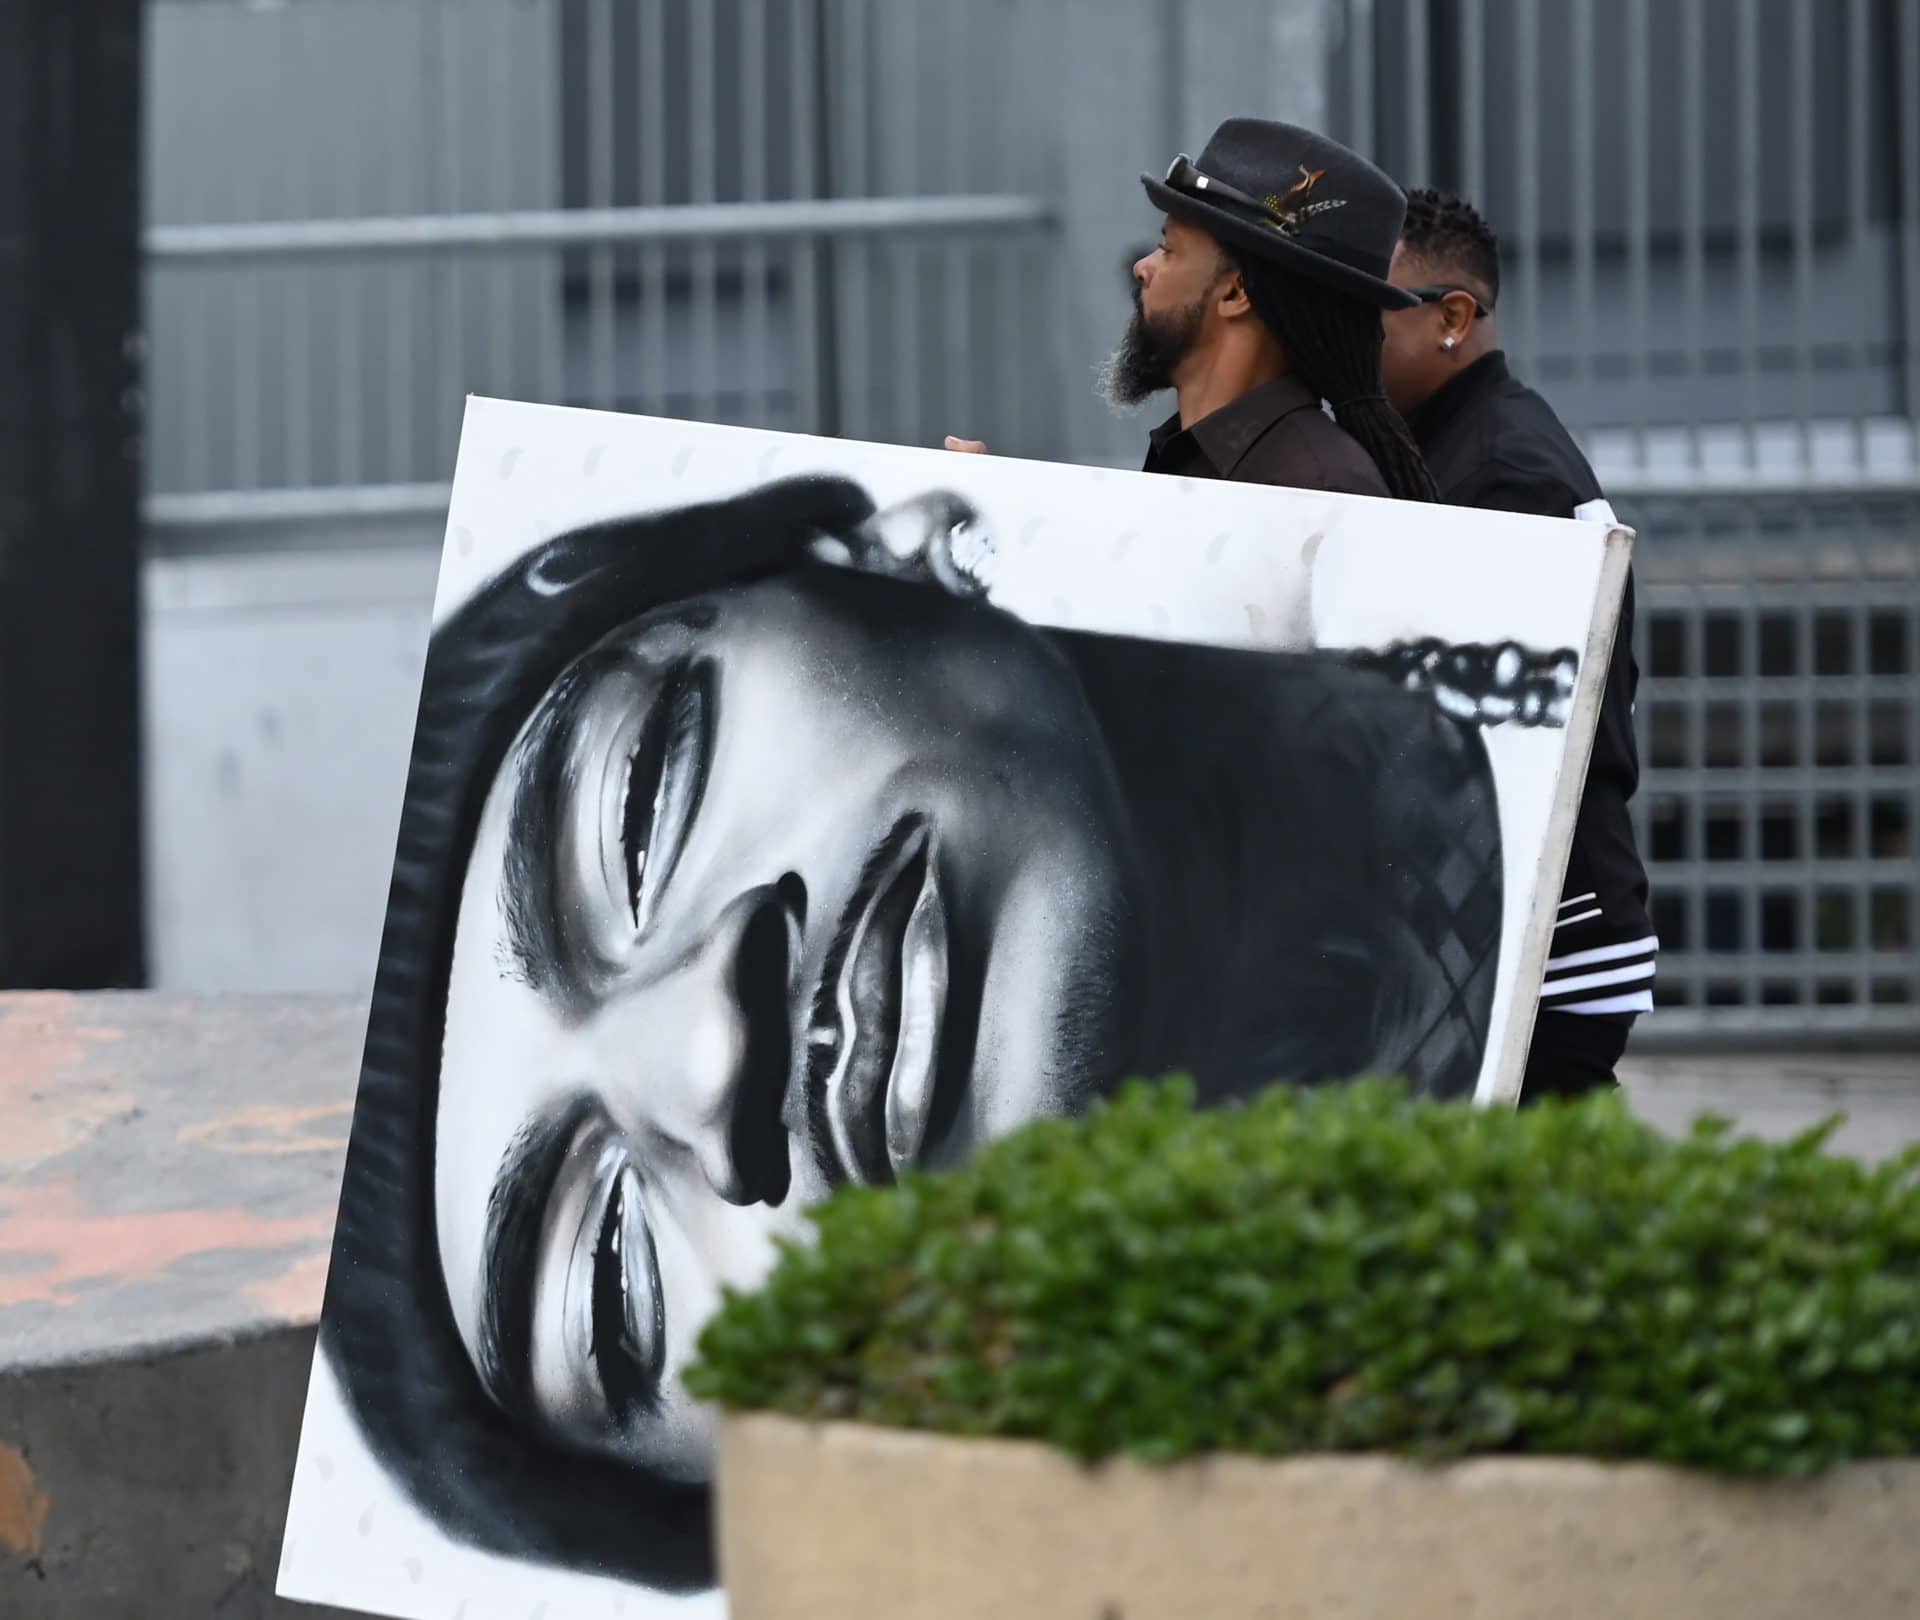 Photos Show Fans Remembering Nipsey Hussle At Sold-Out Memorial Service